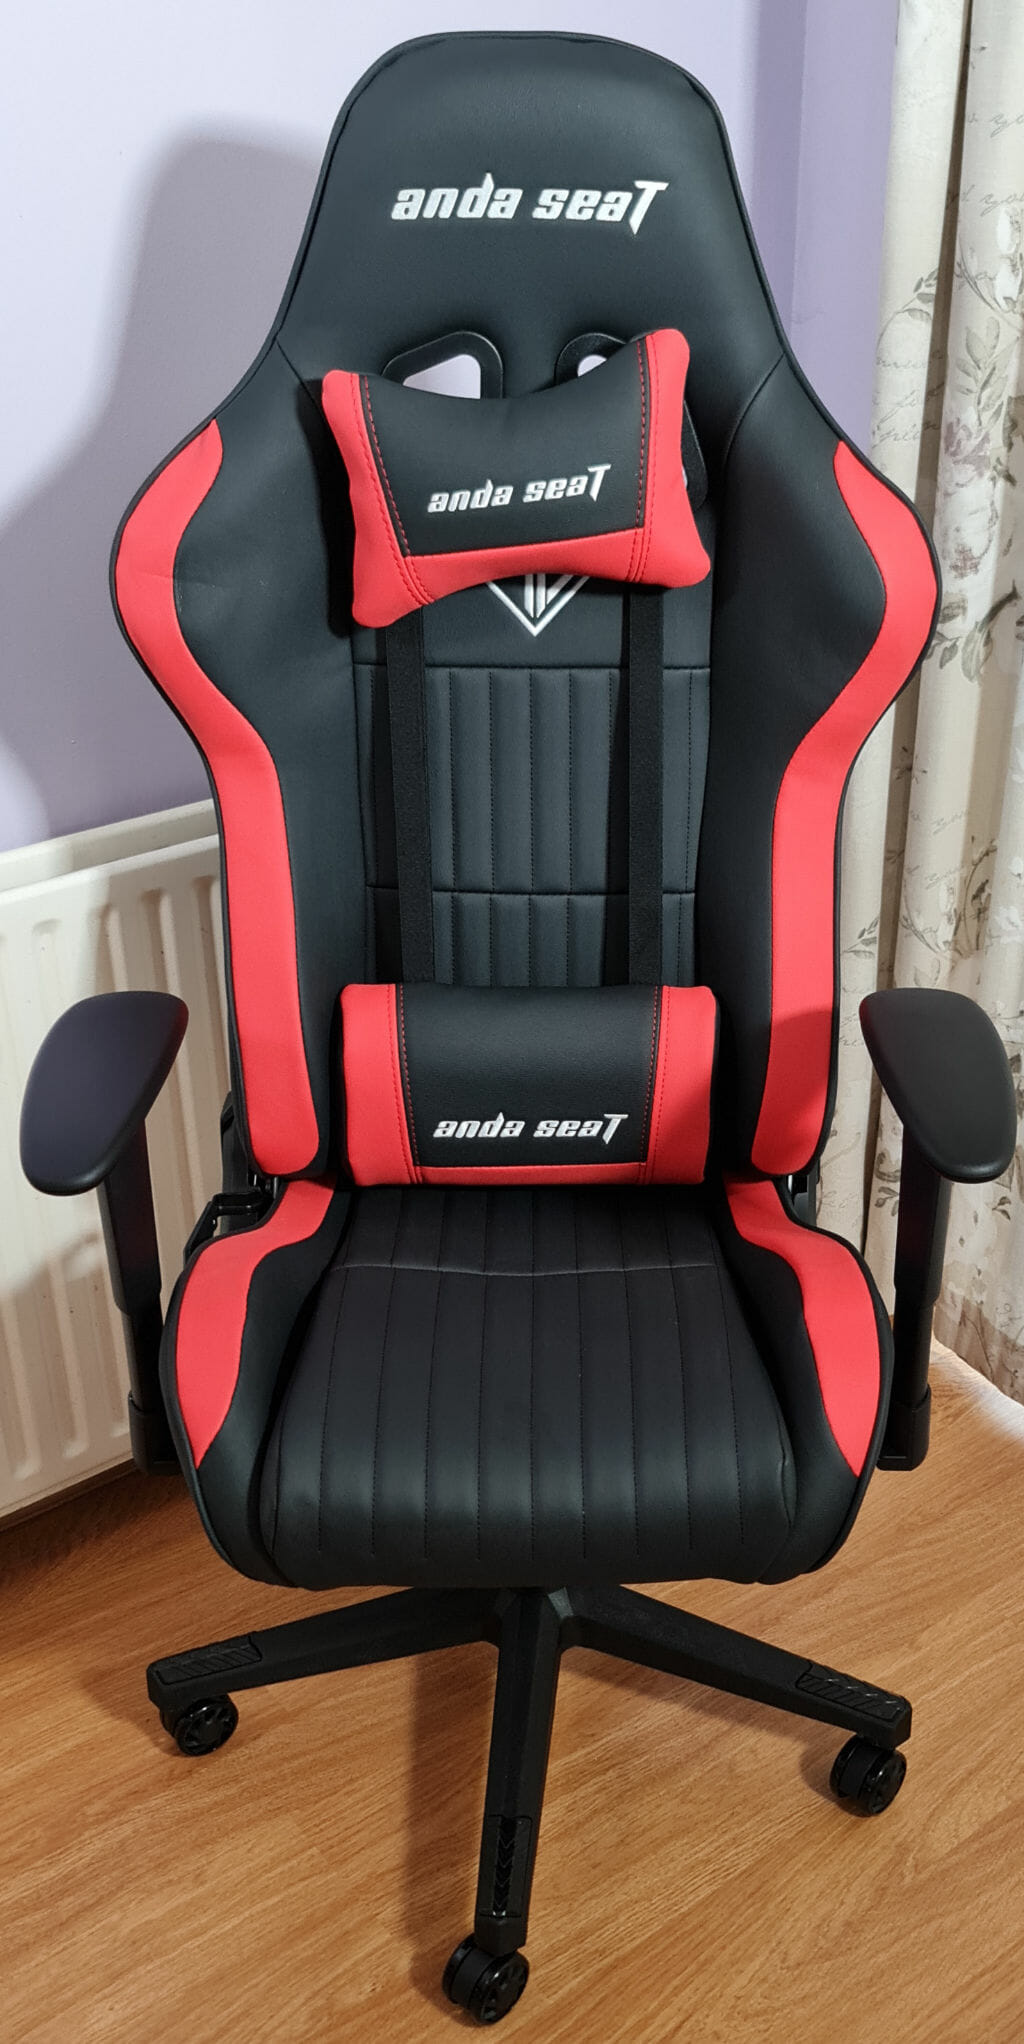 AndaSeat Jungle Series Premium Gaming Chair Review front